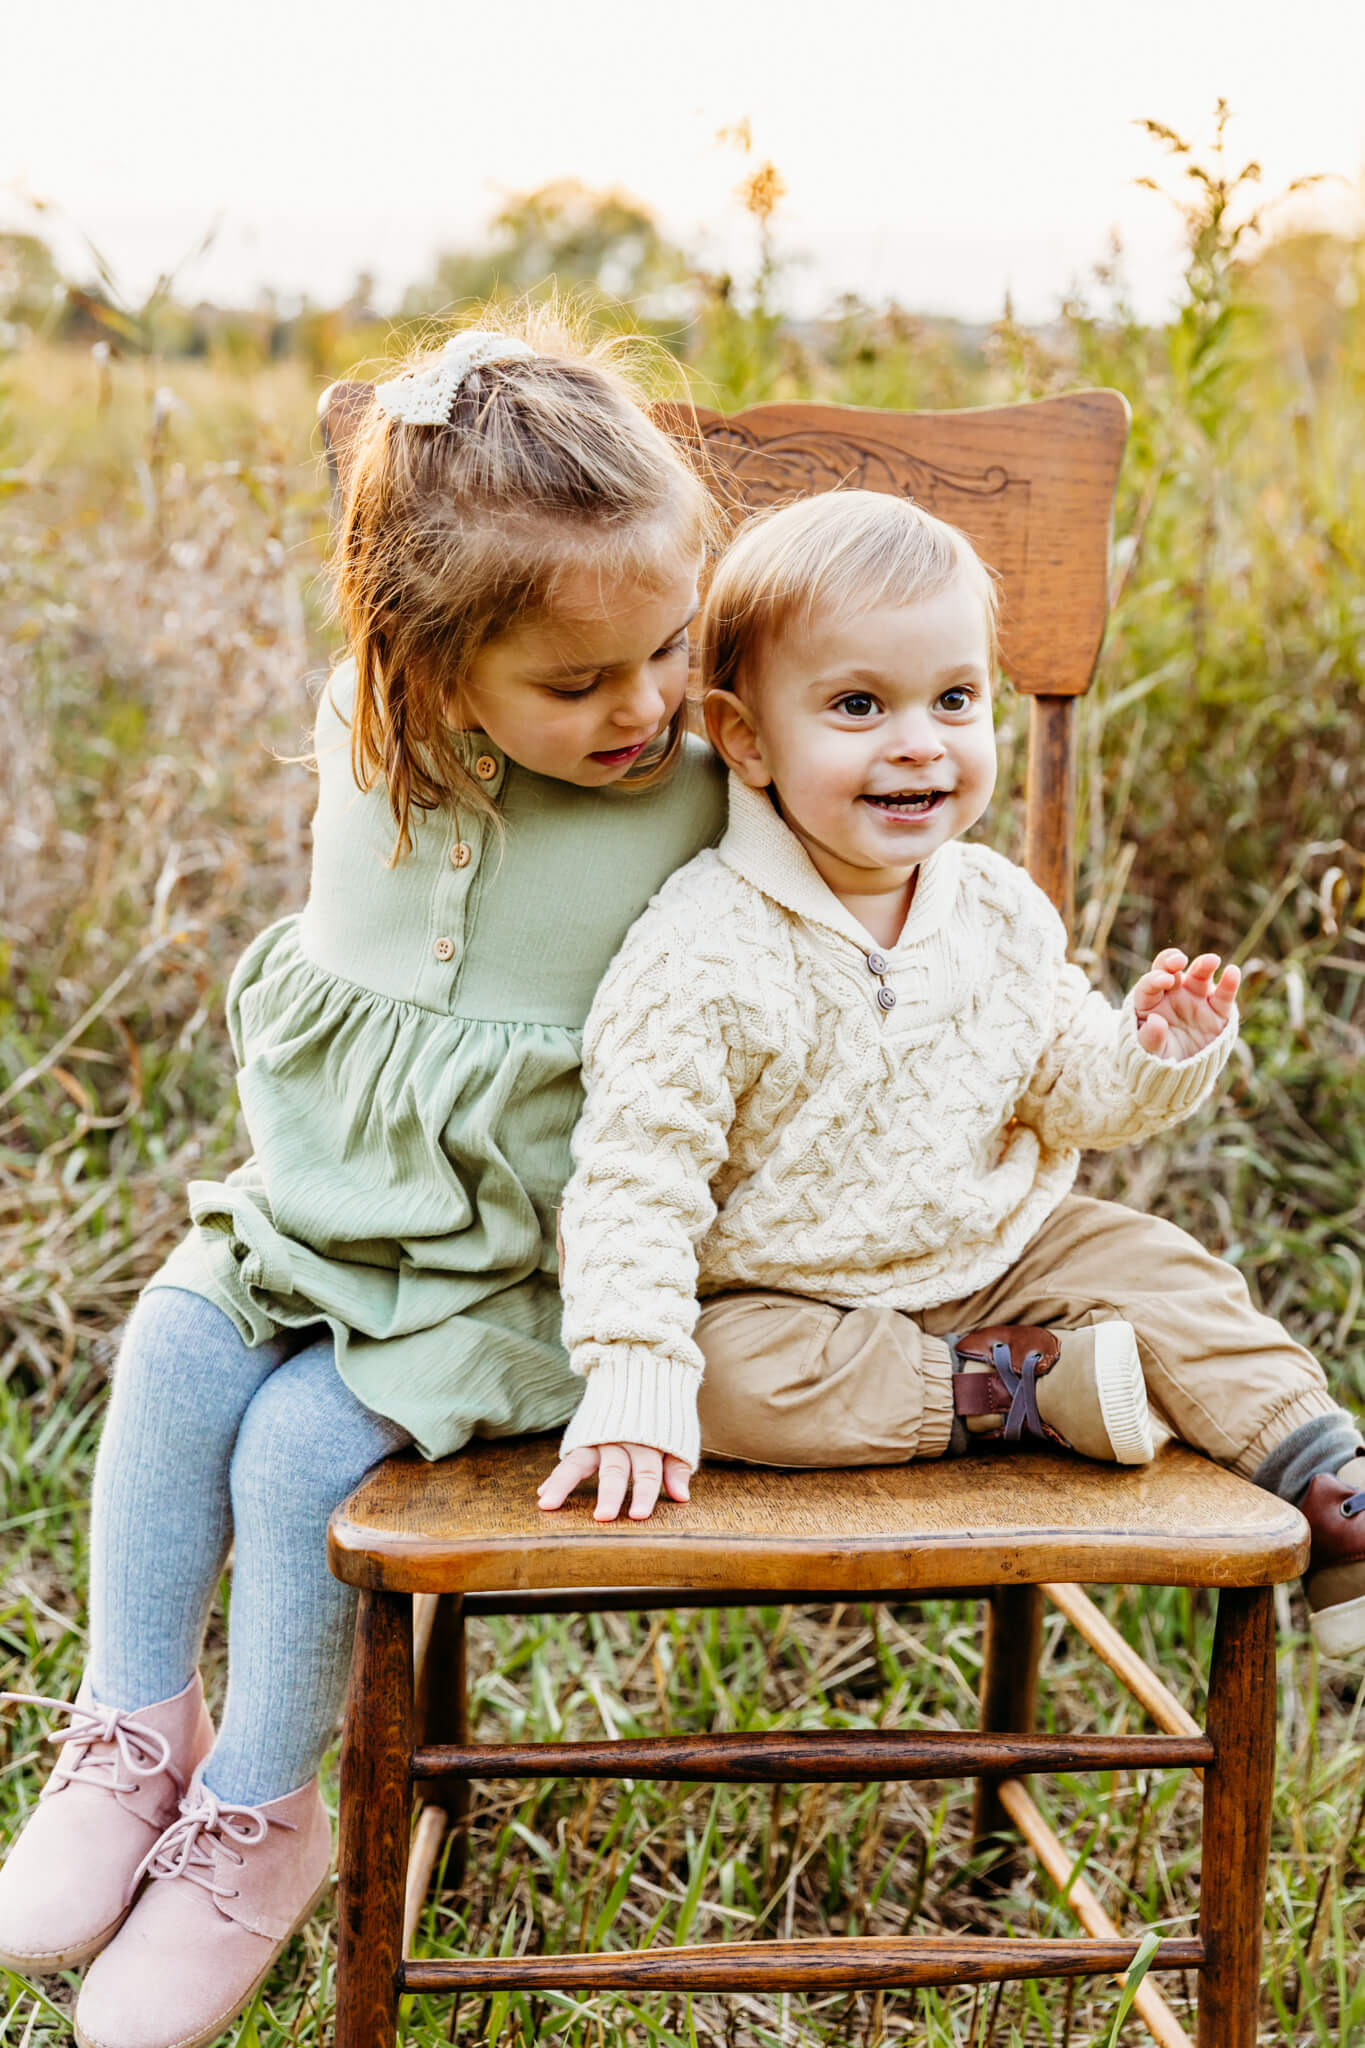 Little girl in a green dress looking at her younger brother in a cream sweater while sitting on a wooden chair together